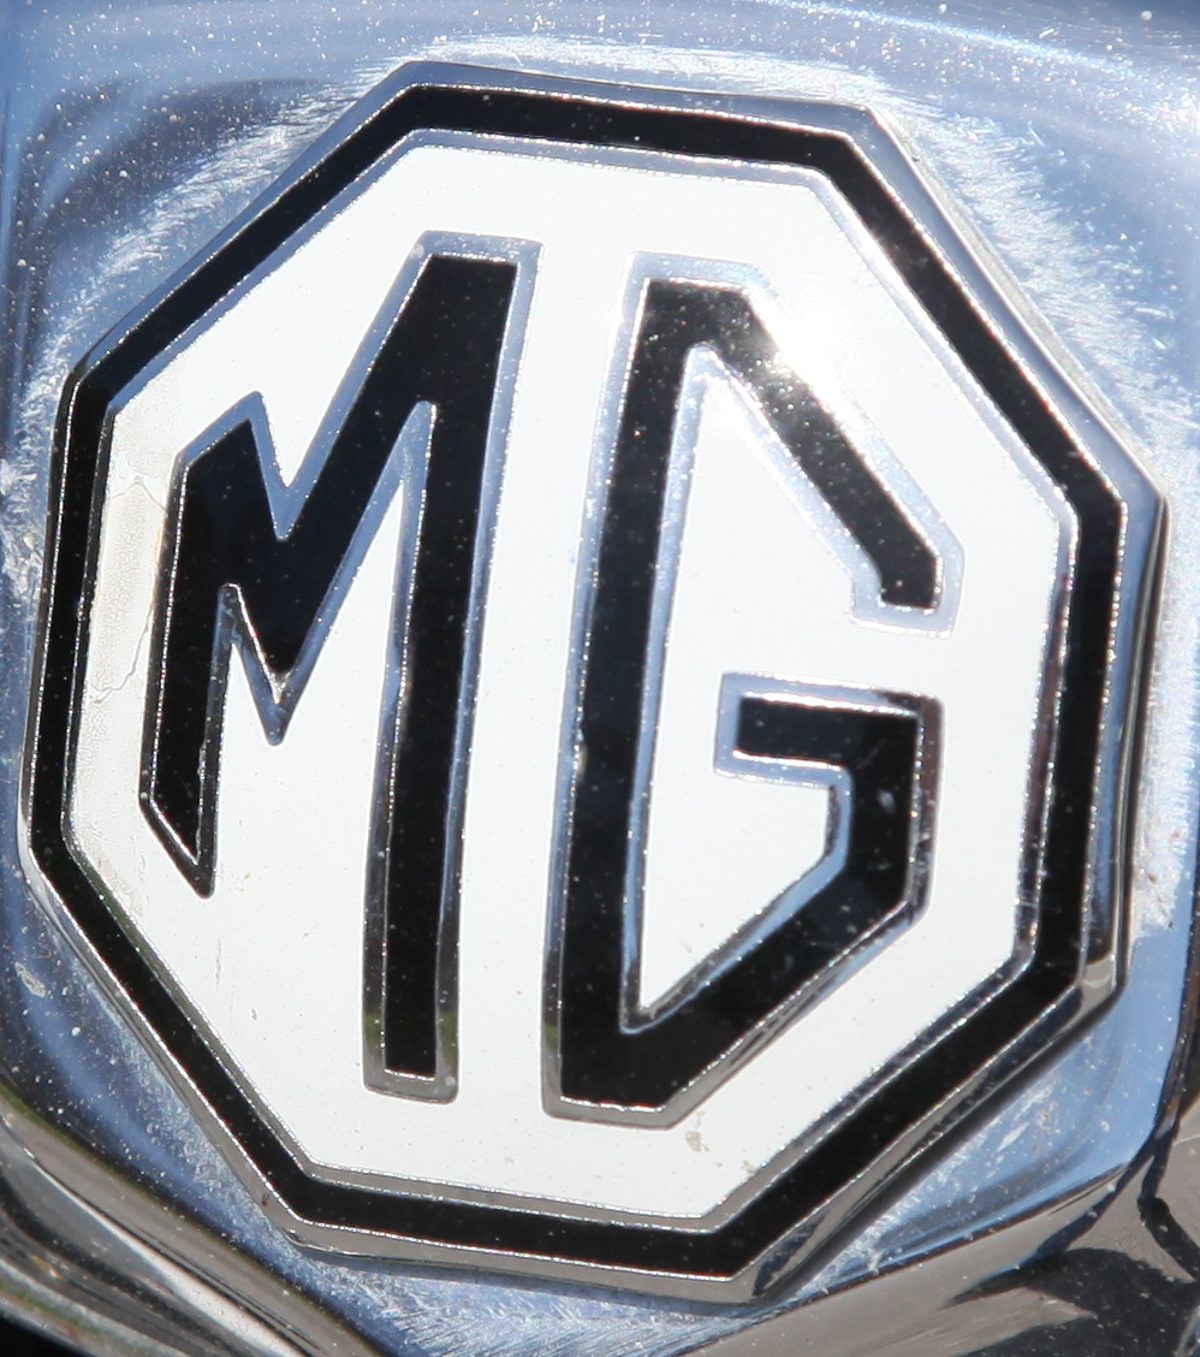 The MG badge is a wonderful example of the Art Deco style. 